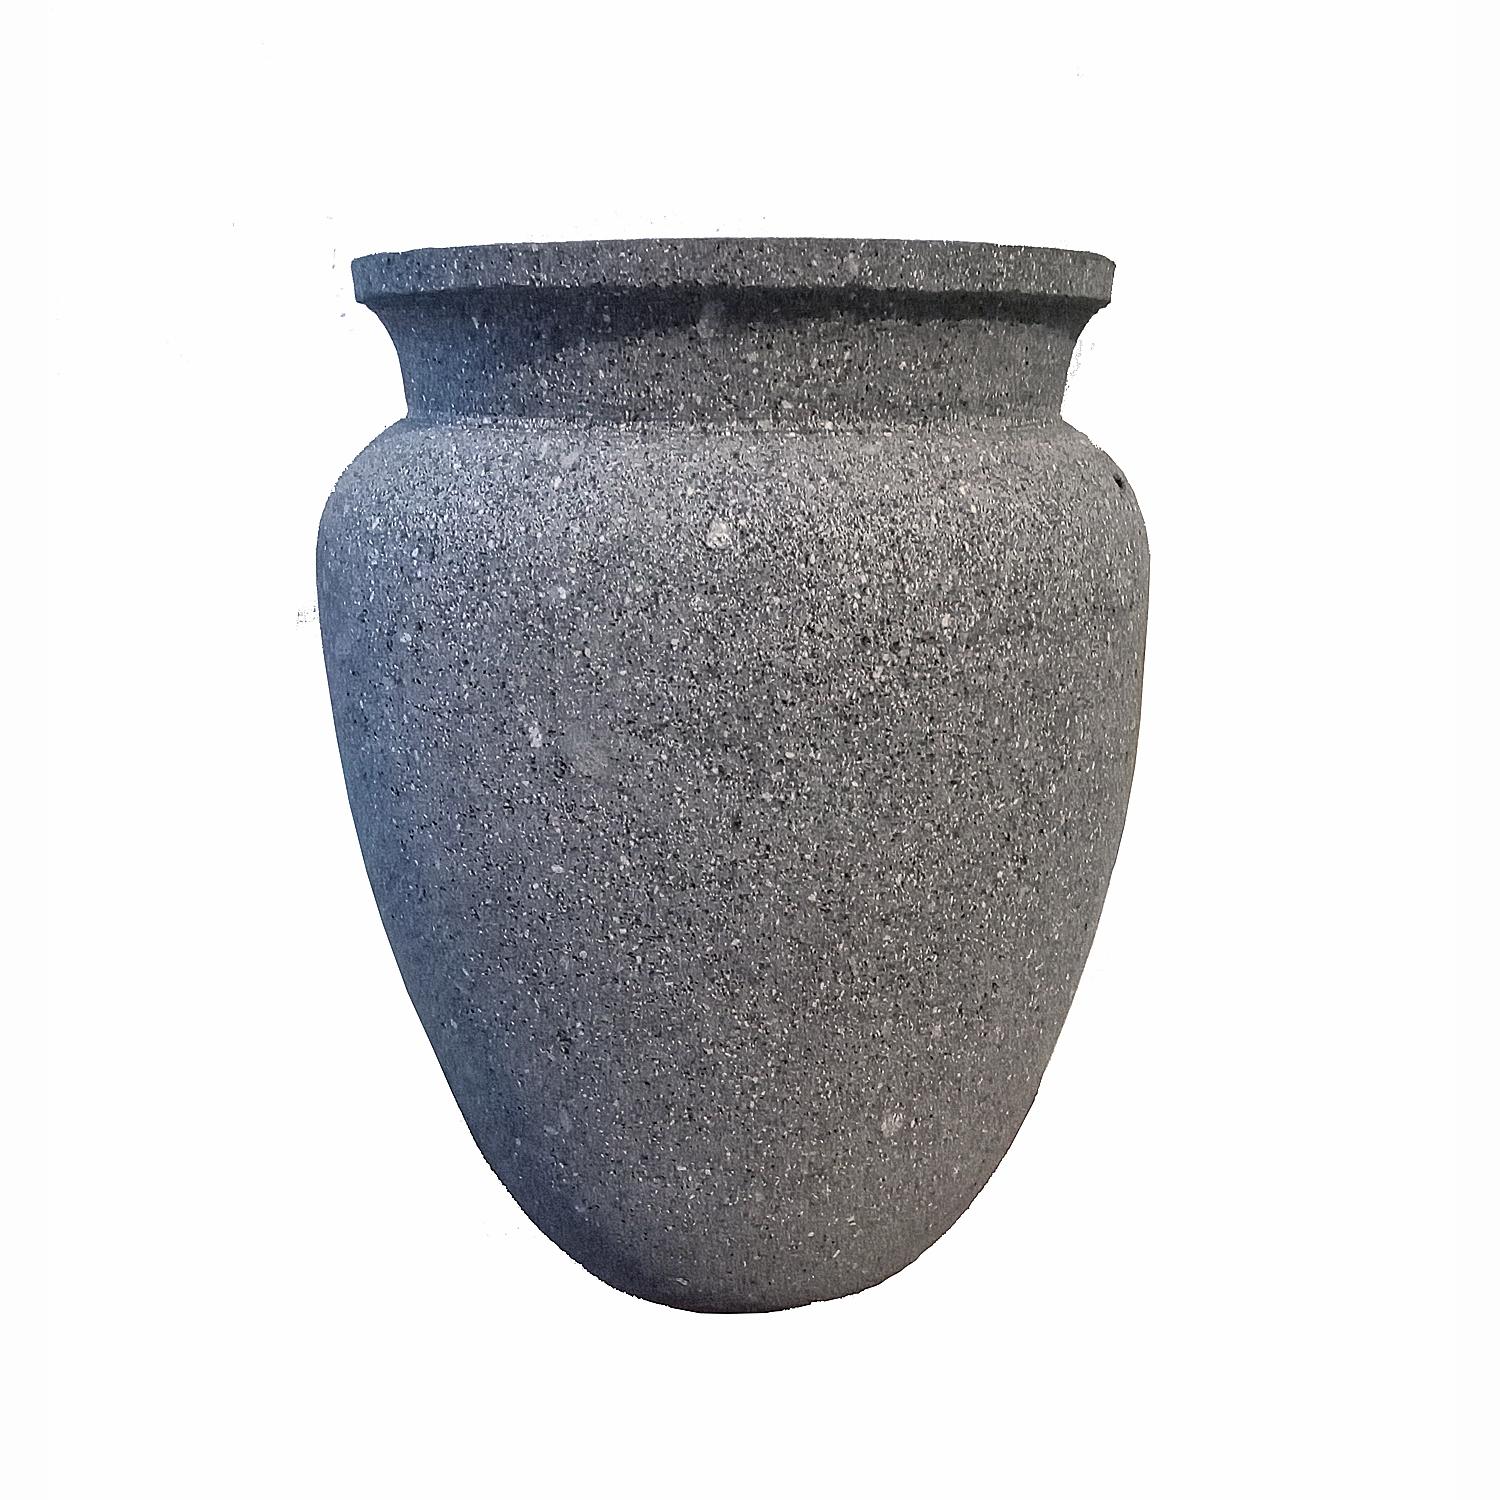 A dark lava stone bowl in a round, shallow shape, hand-crafted in Mexico. An organic modern accent to home décor, in the kitchen, living room or any other area, indoors or outdoors. Its softly rounded edges bring out the texture of stone to take